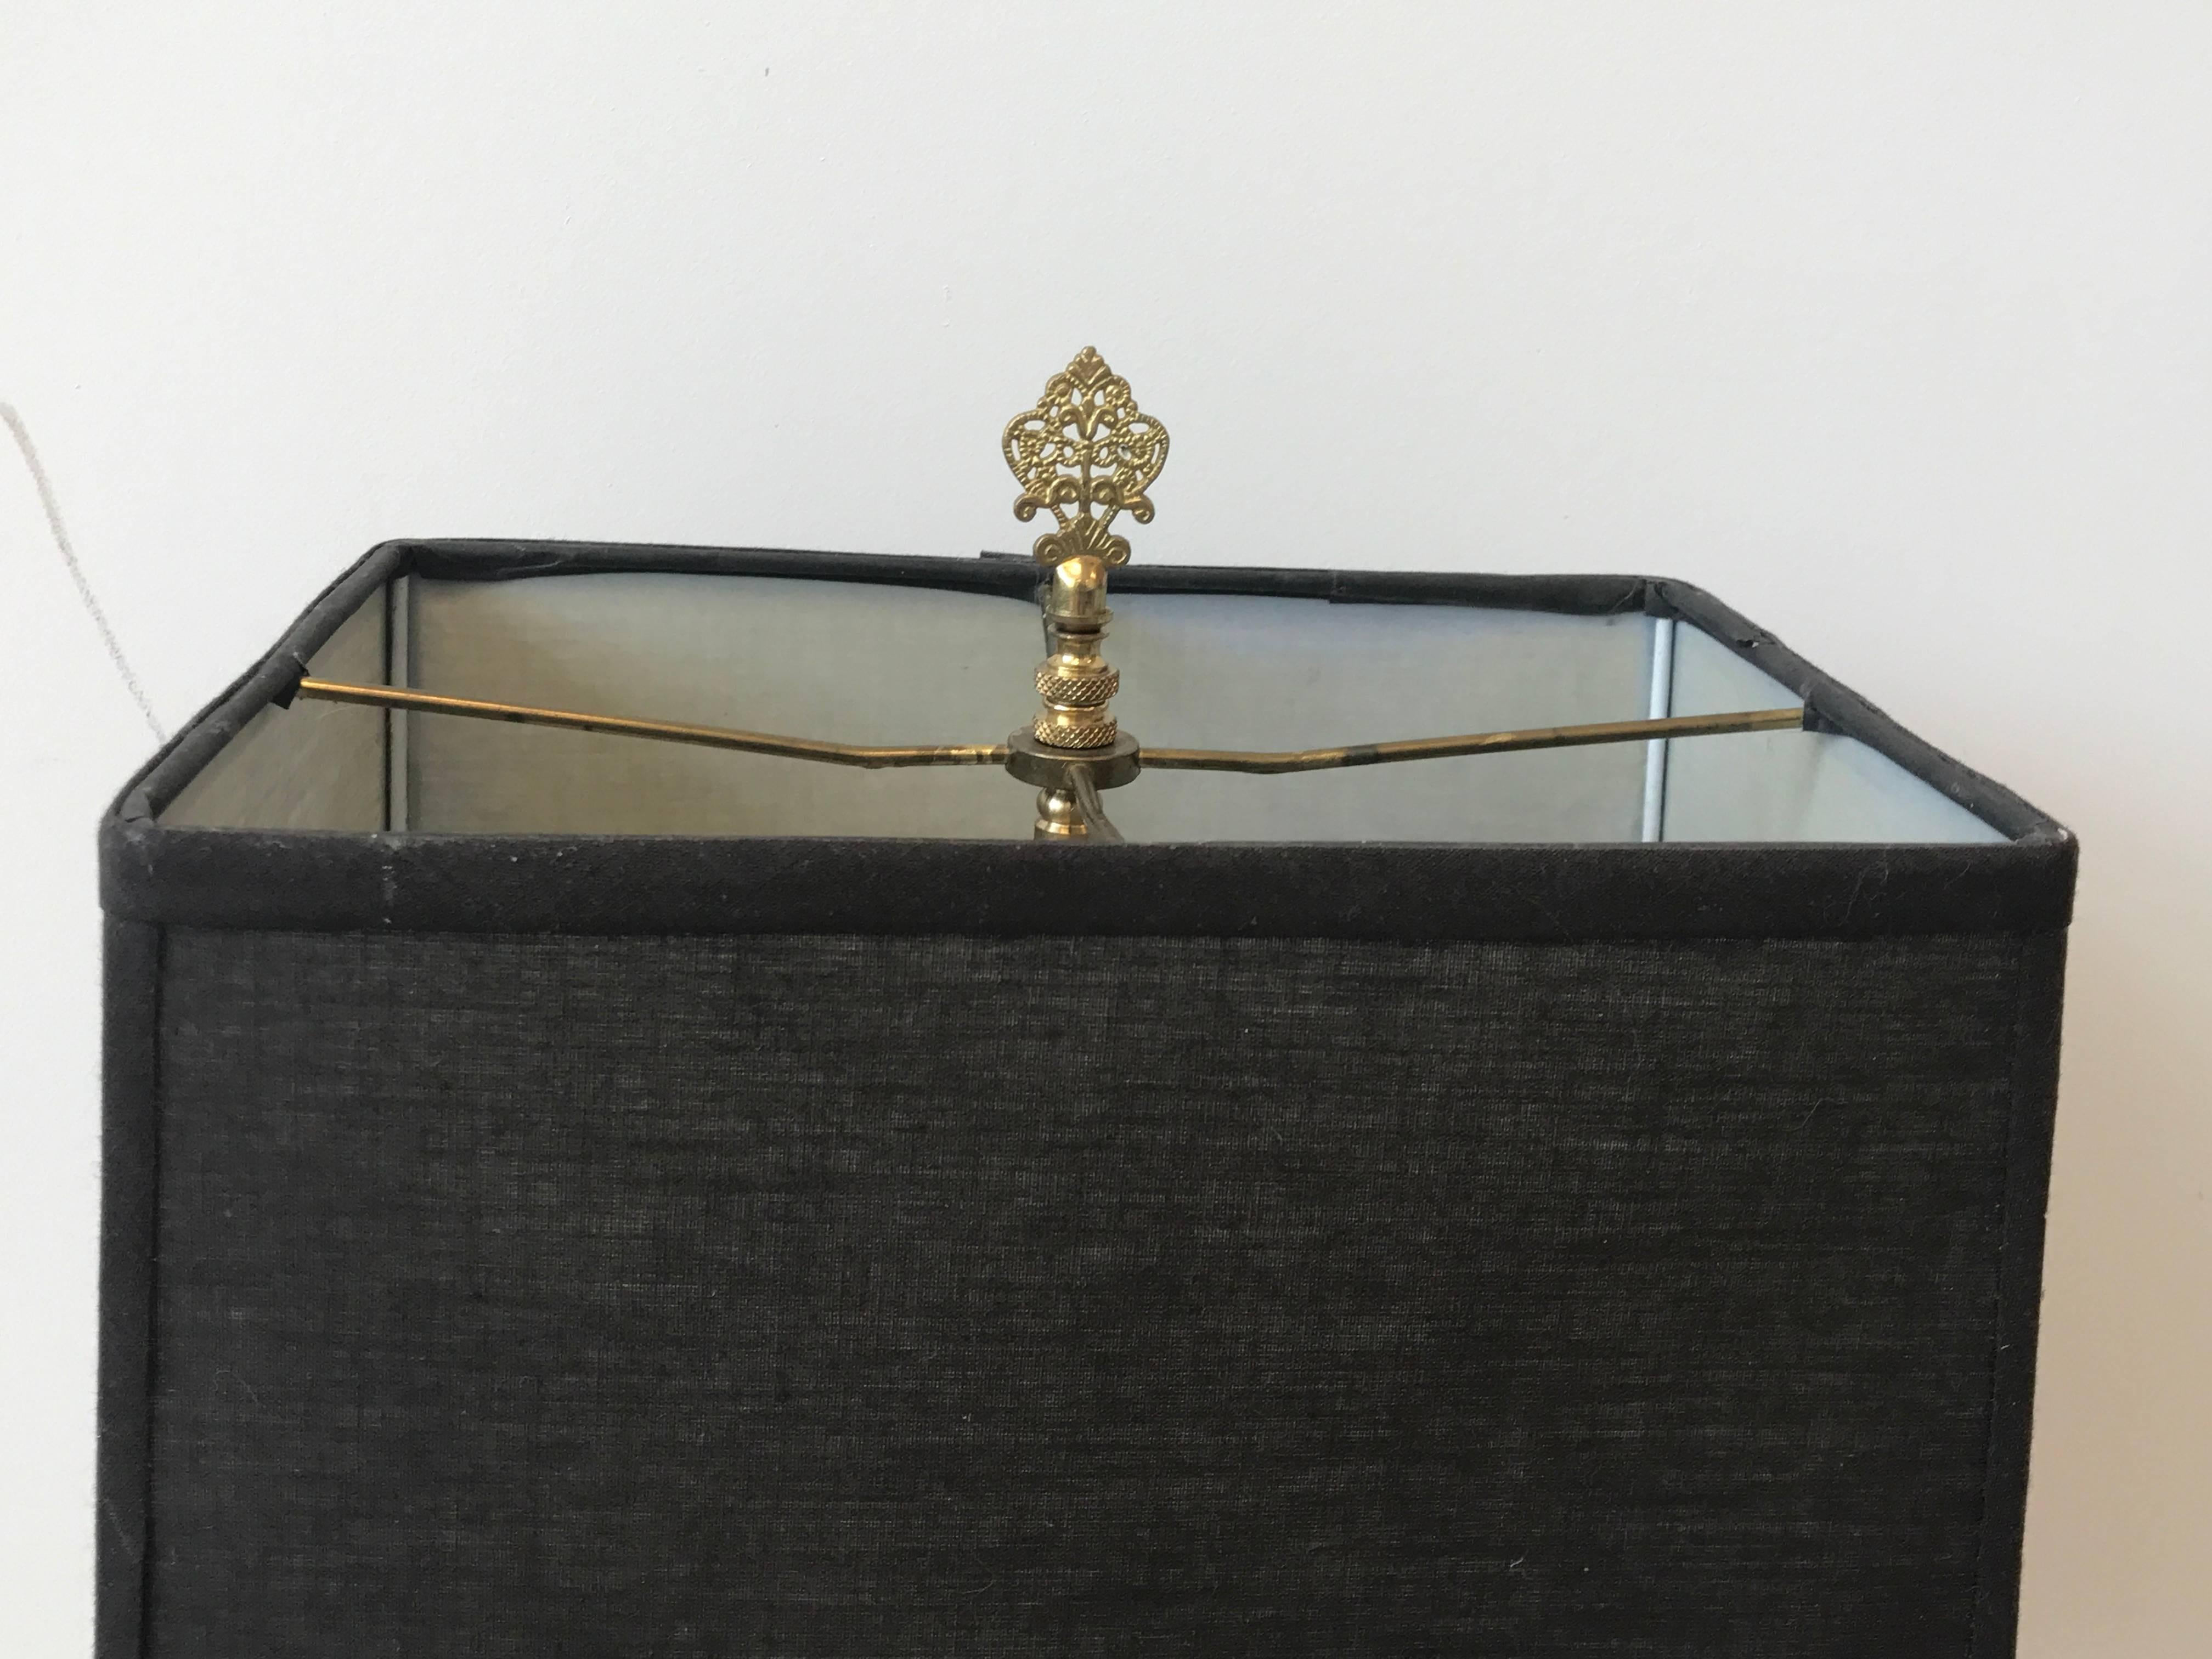 Offered is a gorgeous, 1940s Italian brass and onyx Bouillotte candlestick lamp. Includes shade and finial.